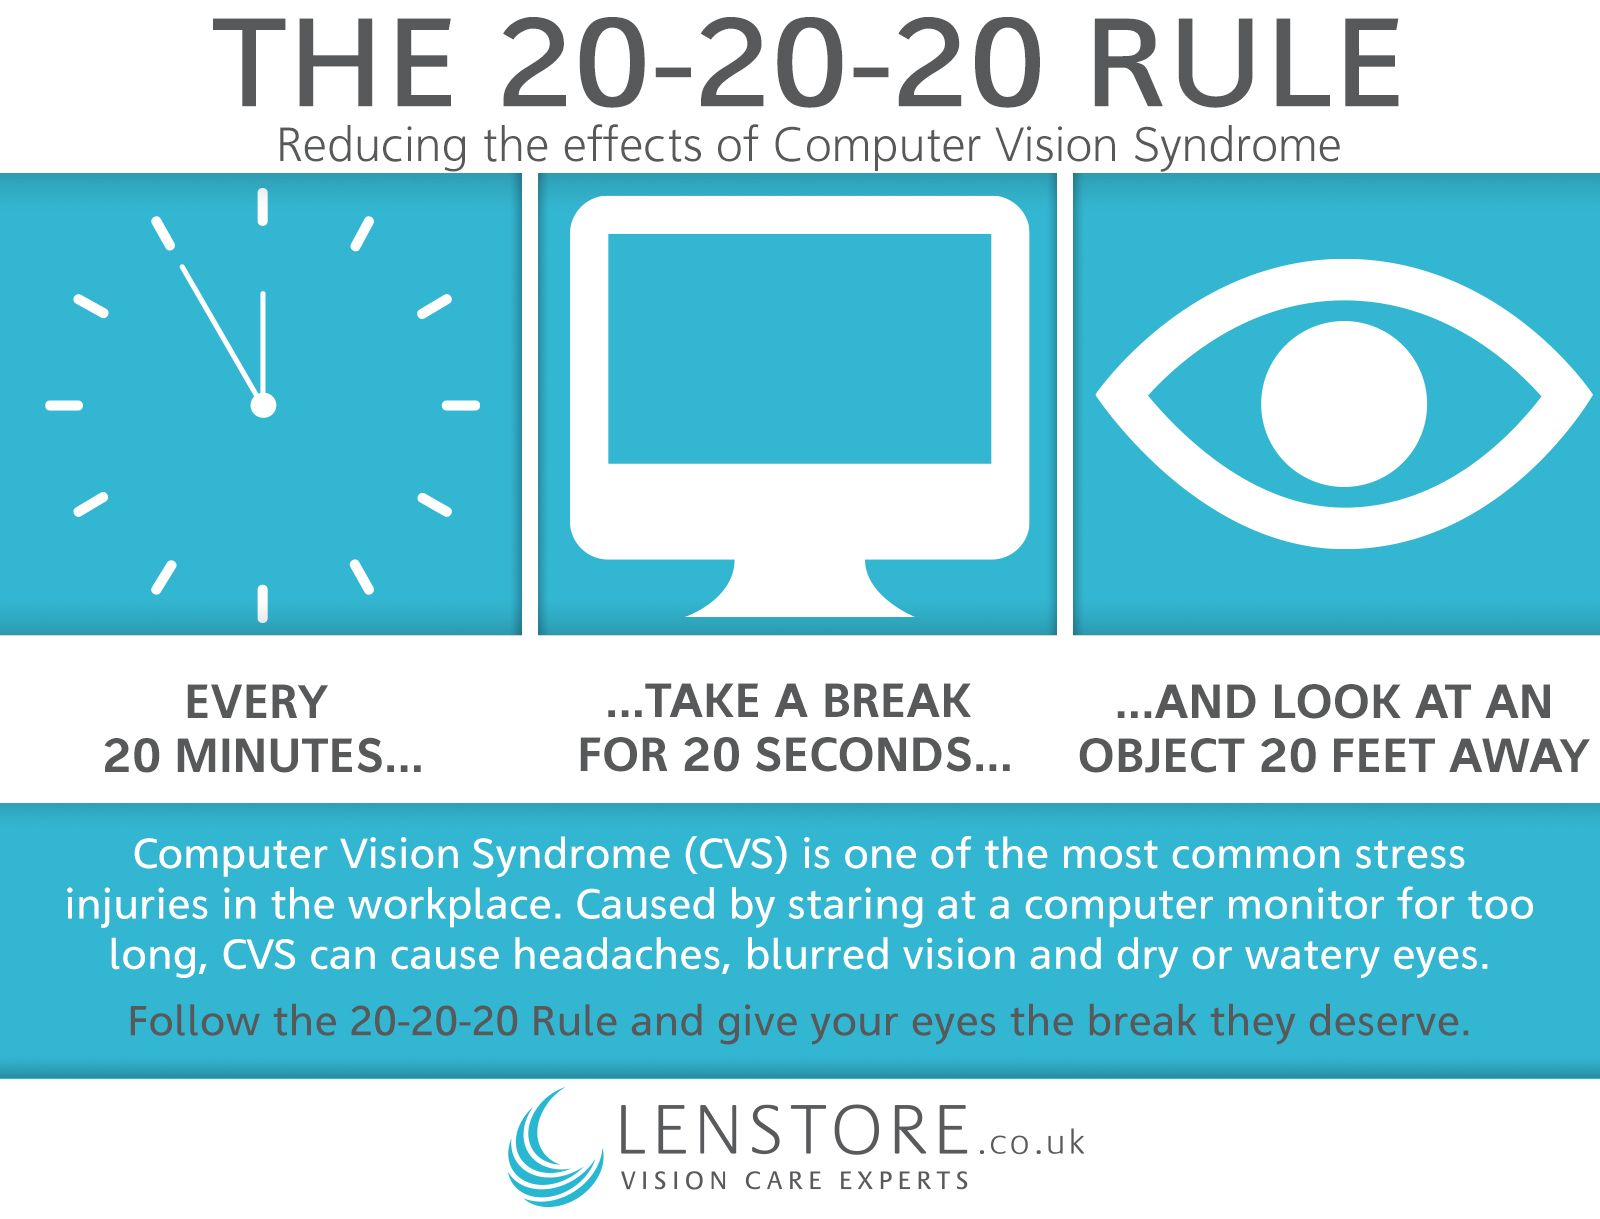 20-20-20 rule infographic